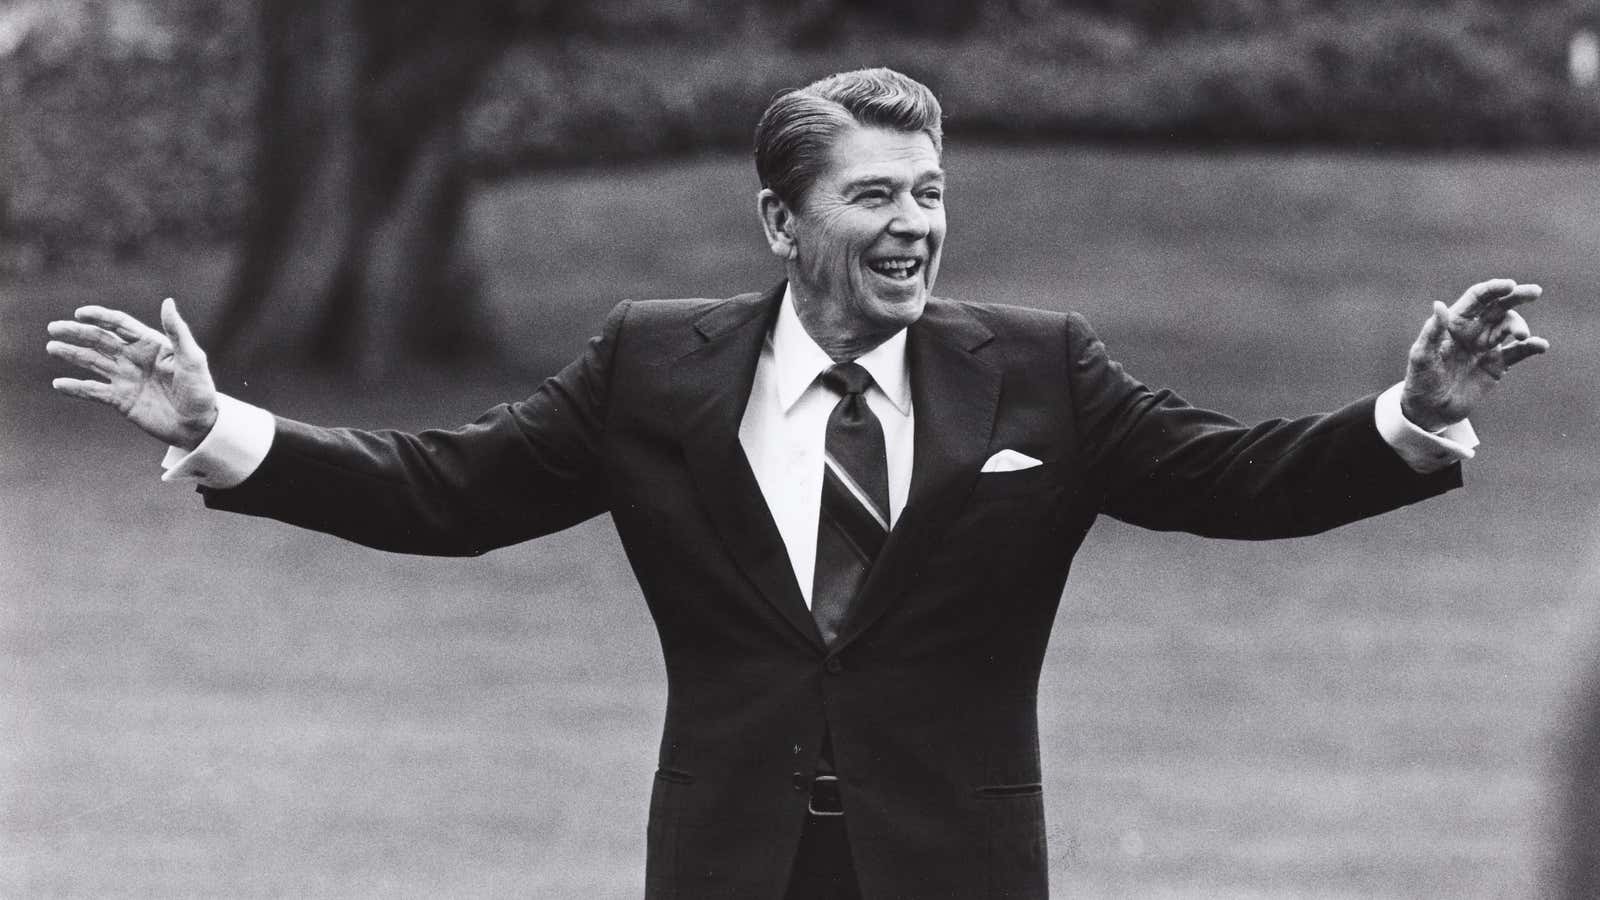 The Gipper: Remembered for good economic times, not large deficits.